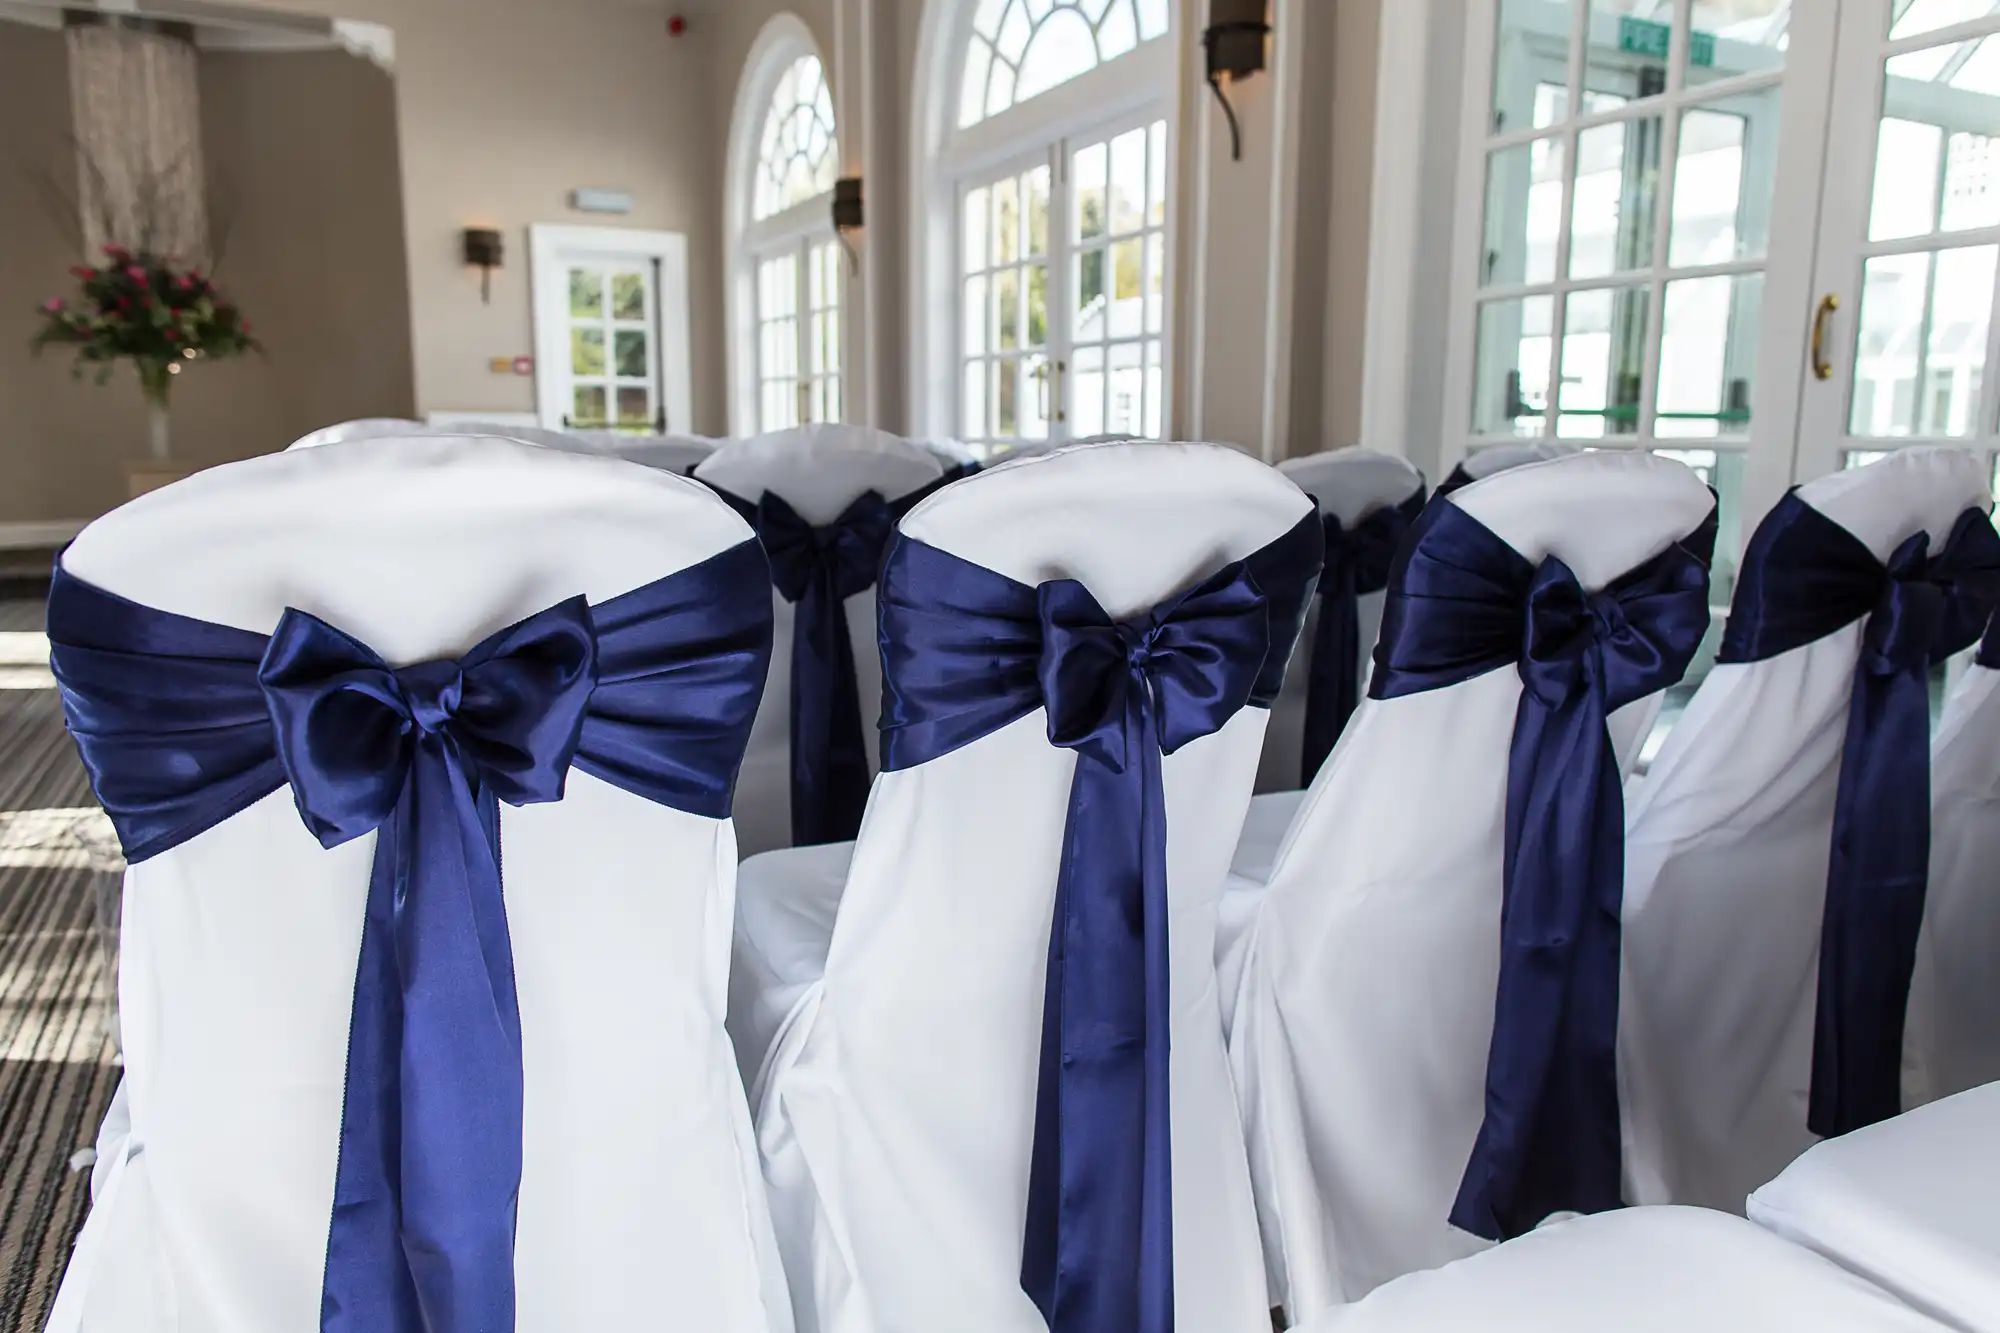 White chairs with dark blue satin bows lined up in a bright room with windows and a floral arrangement in the background.